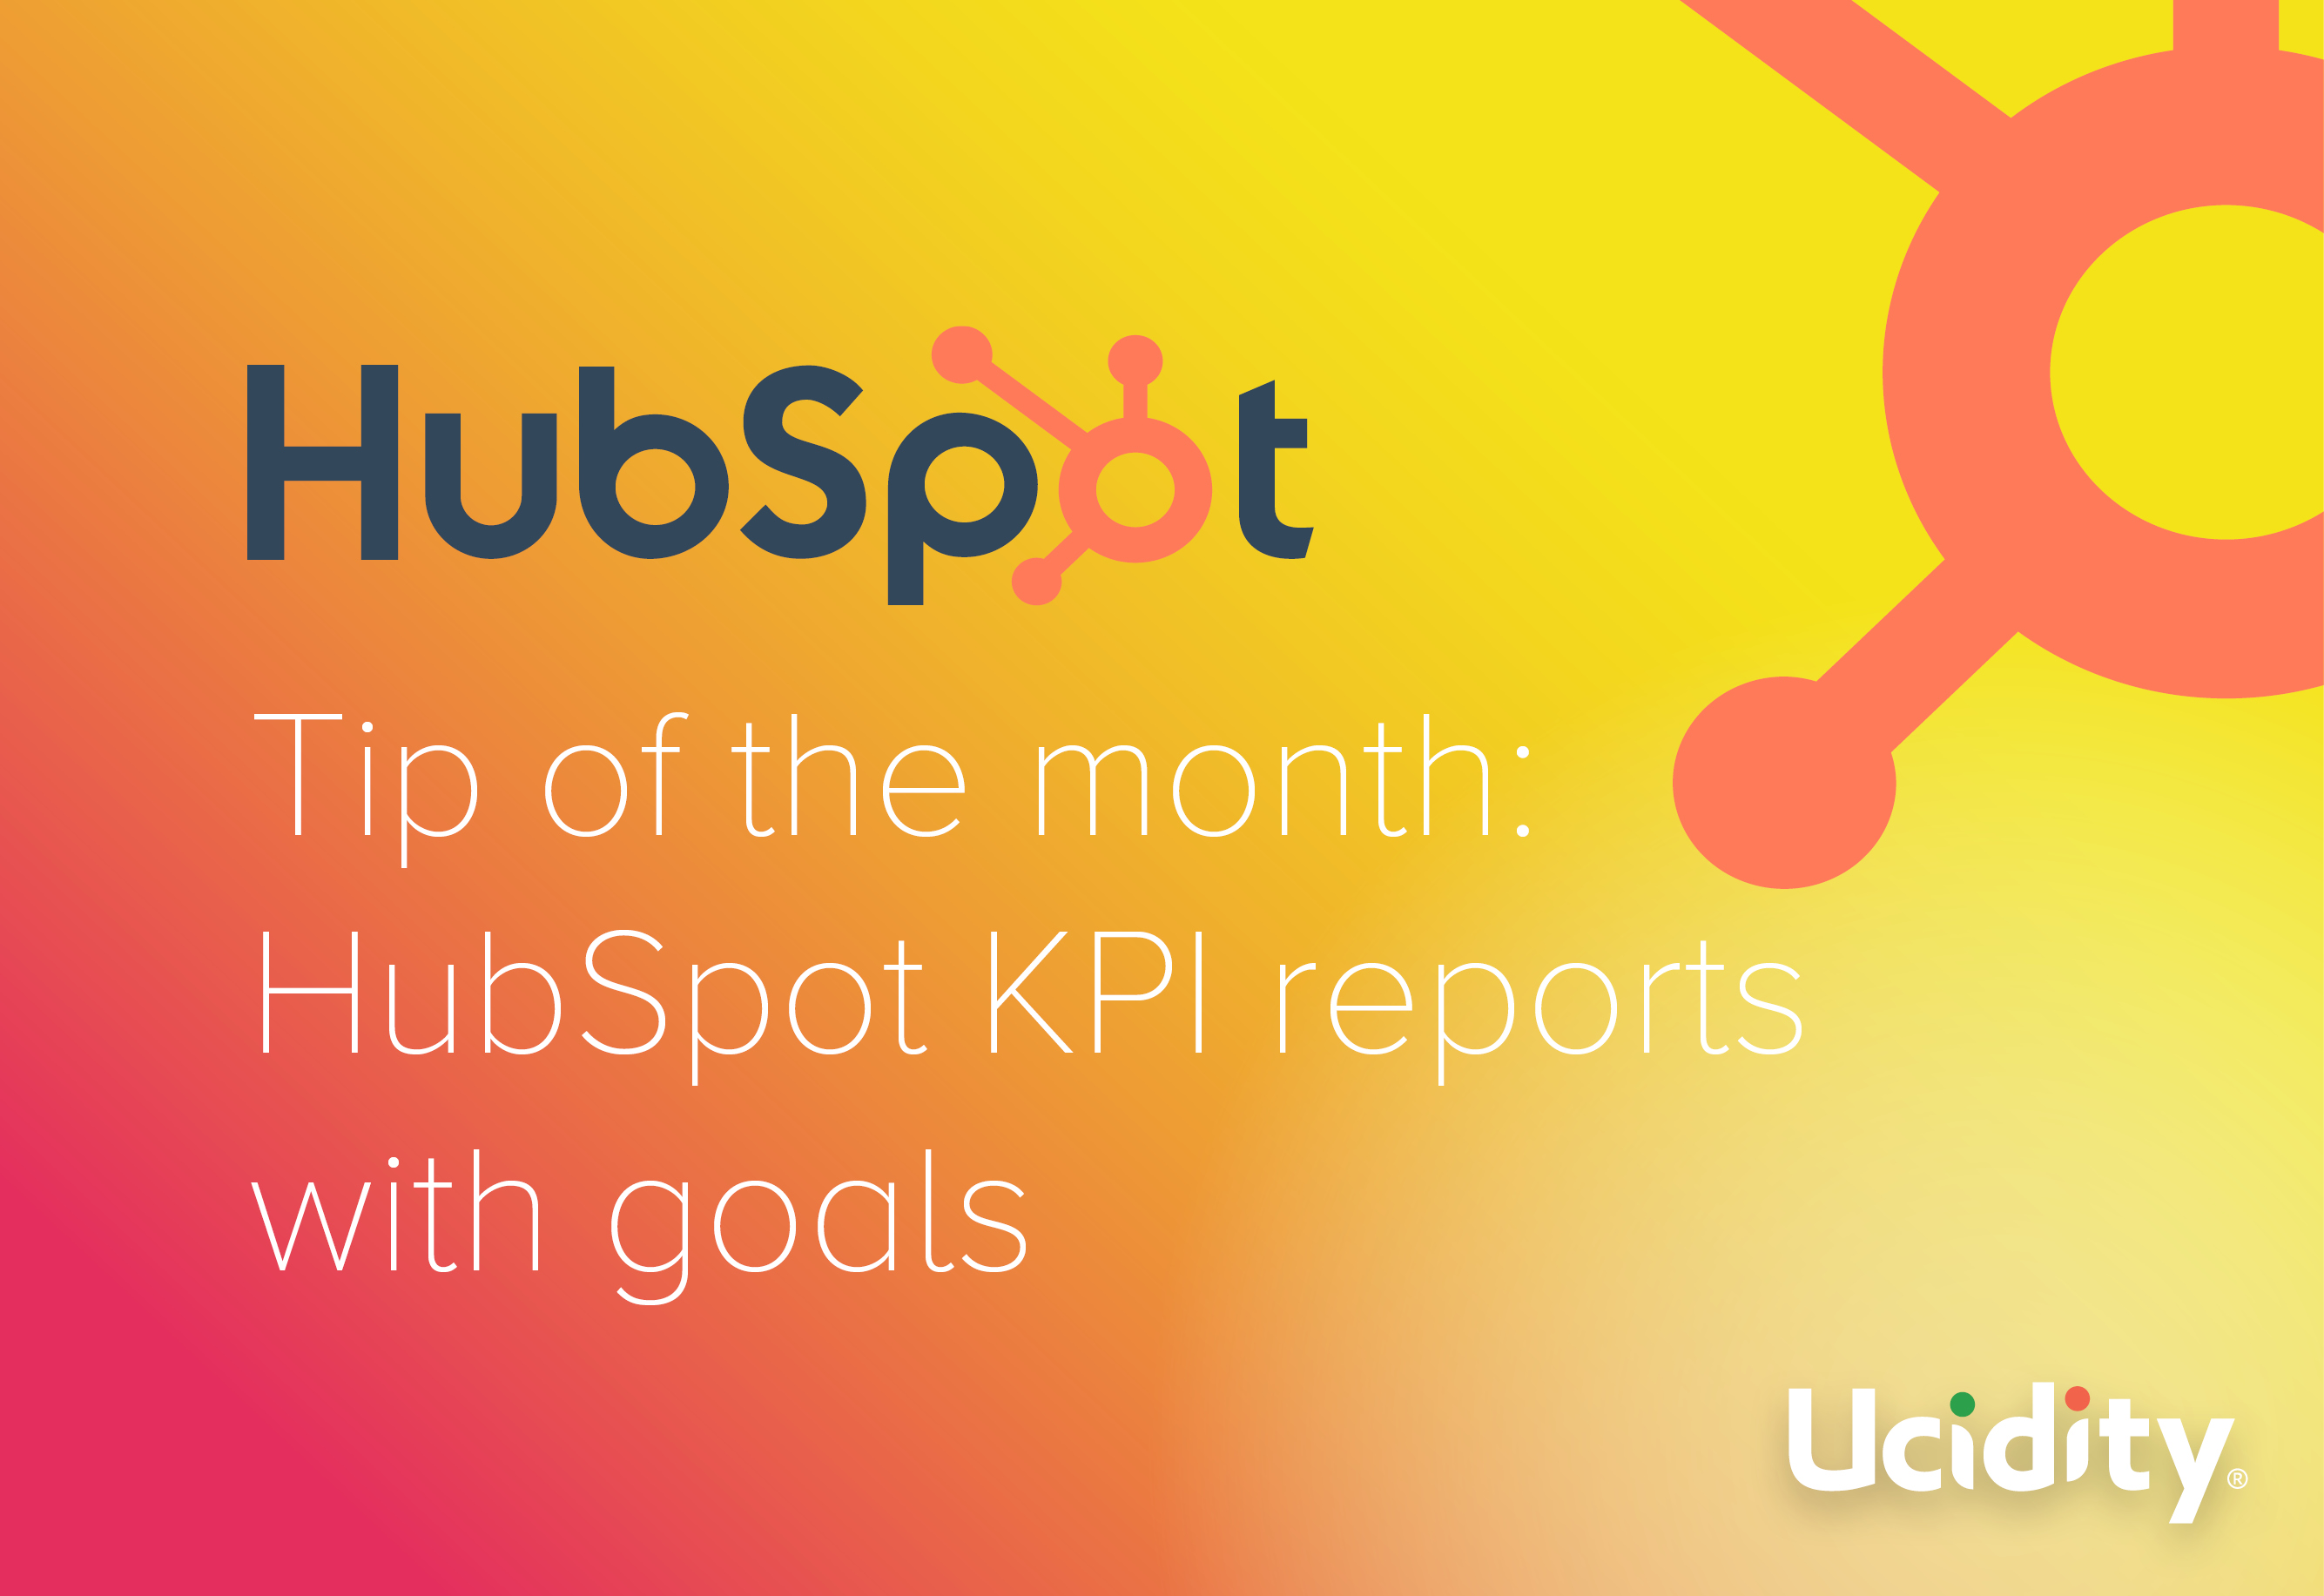 HubSpot Tip of the Month: HubSpot KPI reports with goals